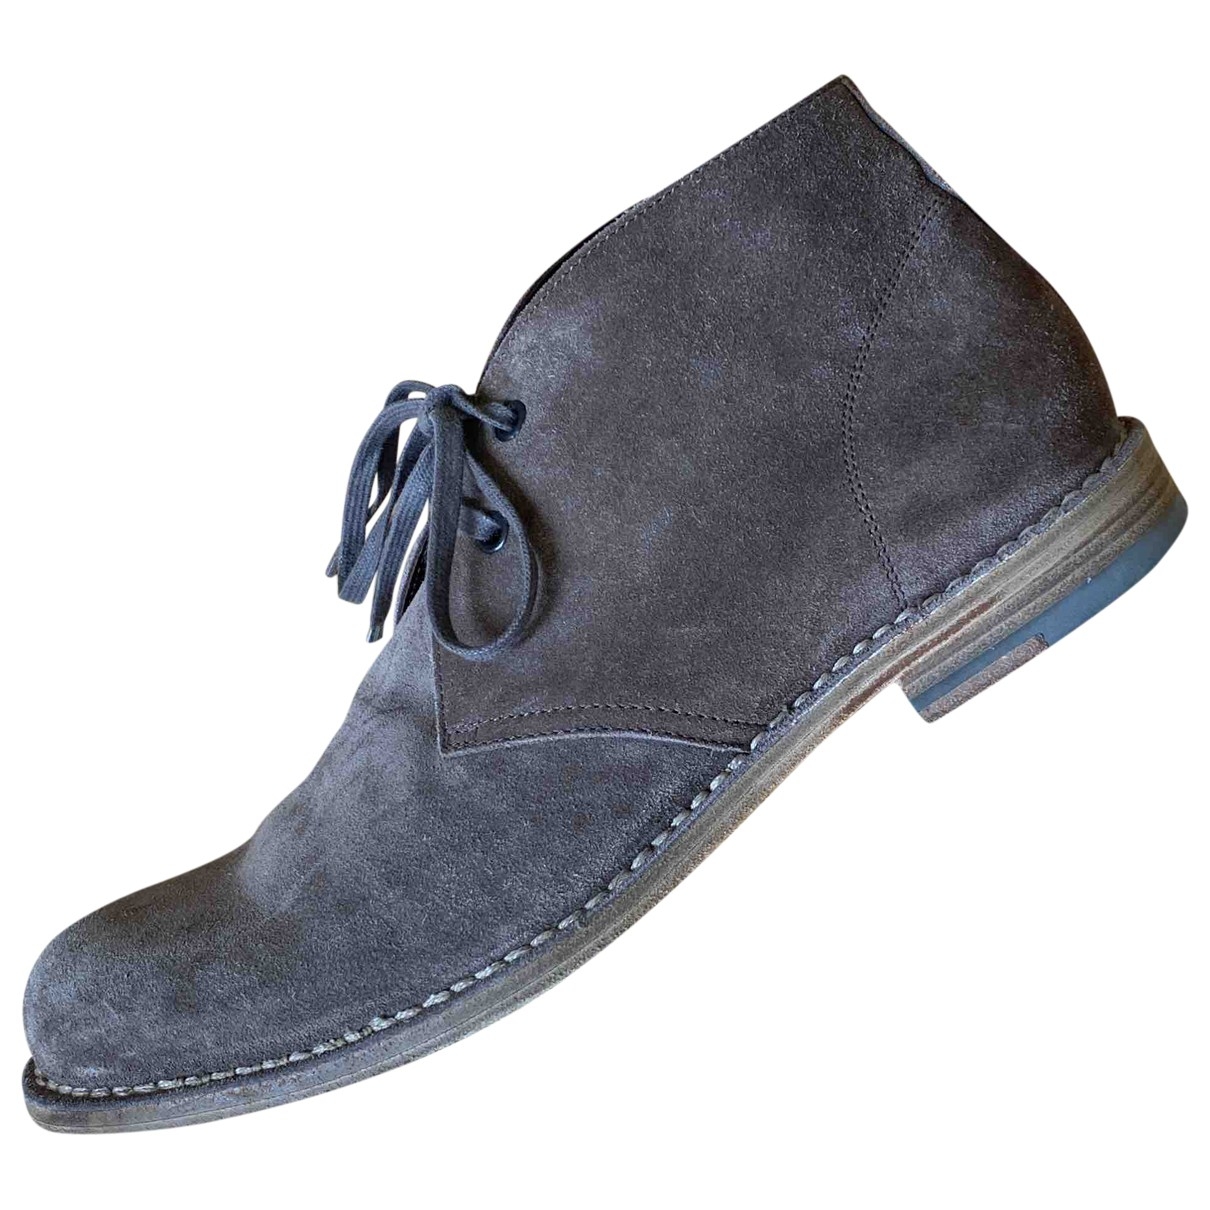 Suede Ranking Max 73% OFF TOP4 Boots